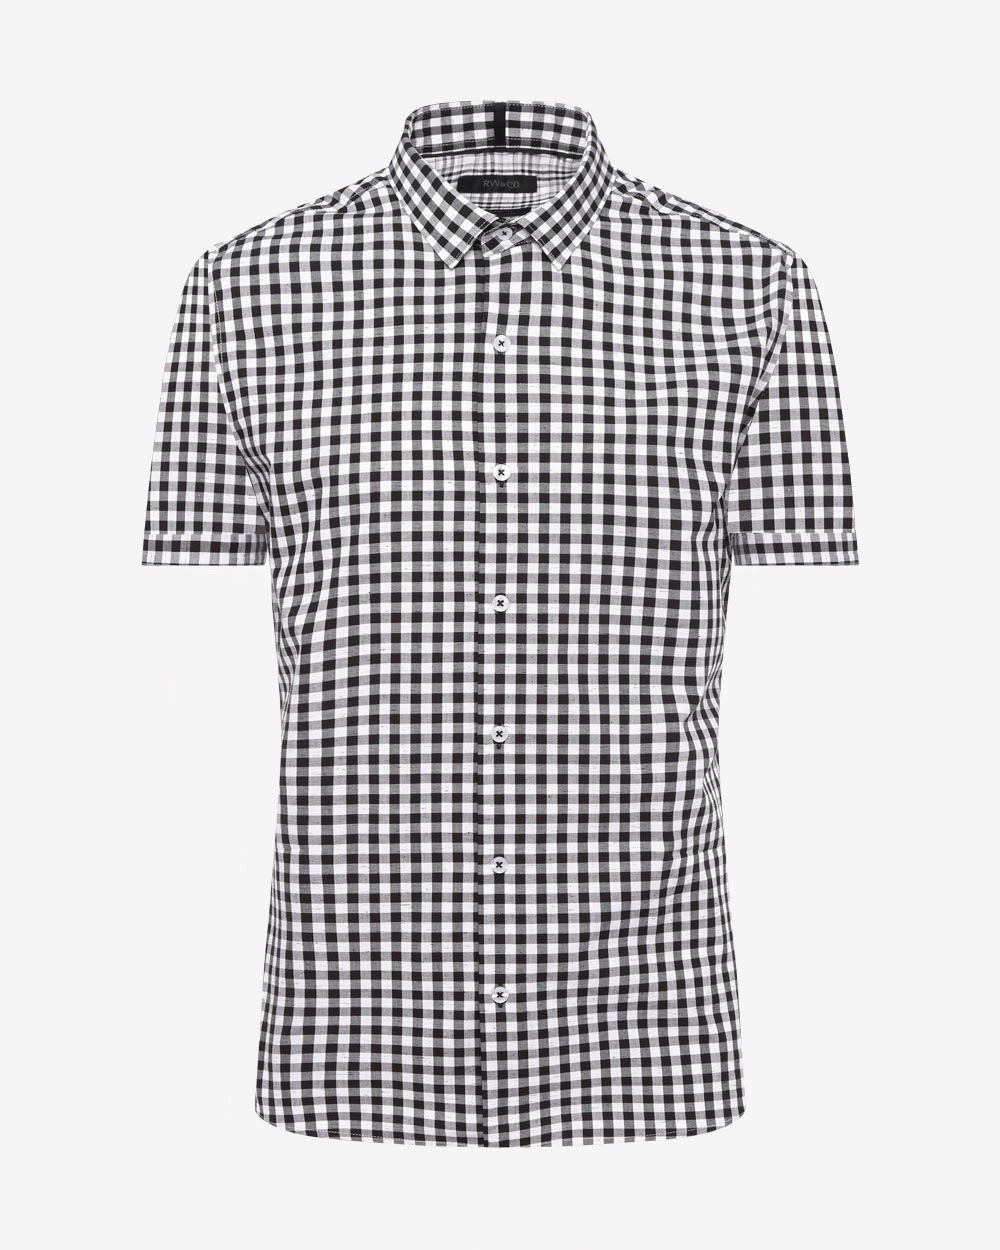 Vichy Tailored Fit Short Sleeve Shirt | RW&CO.